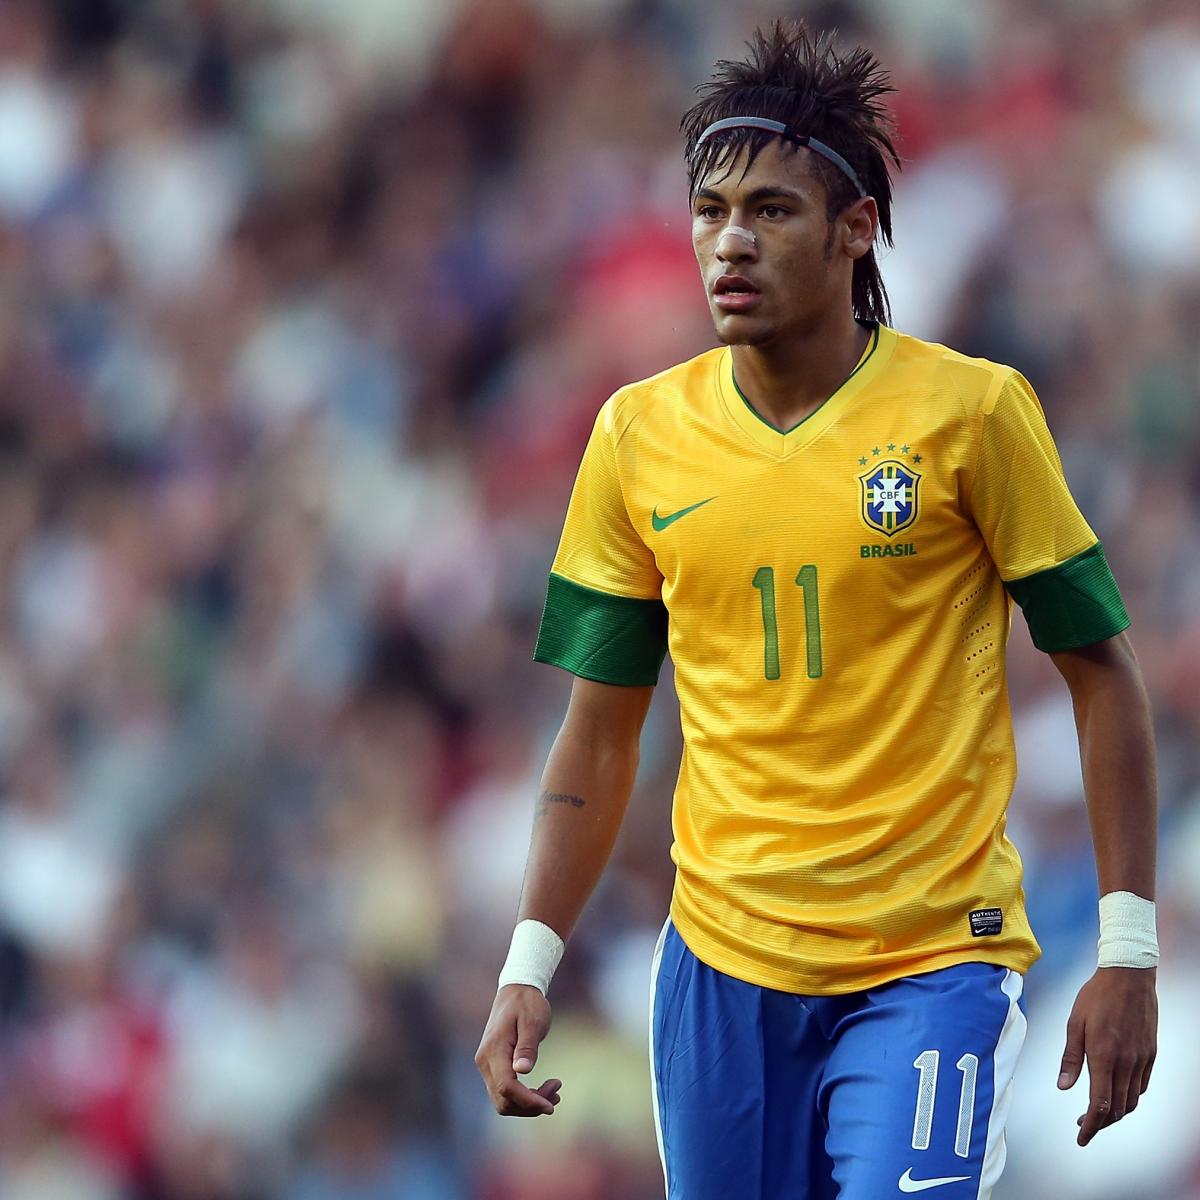 Olympic Soccer 2012: Neymar Has Turned London Games into His Playground